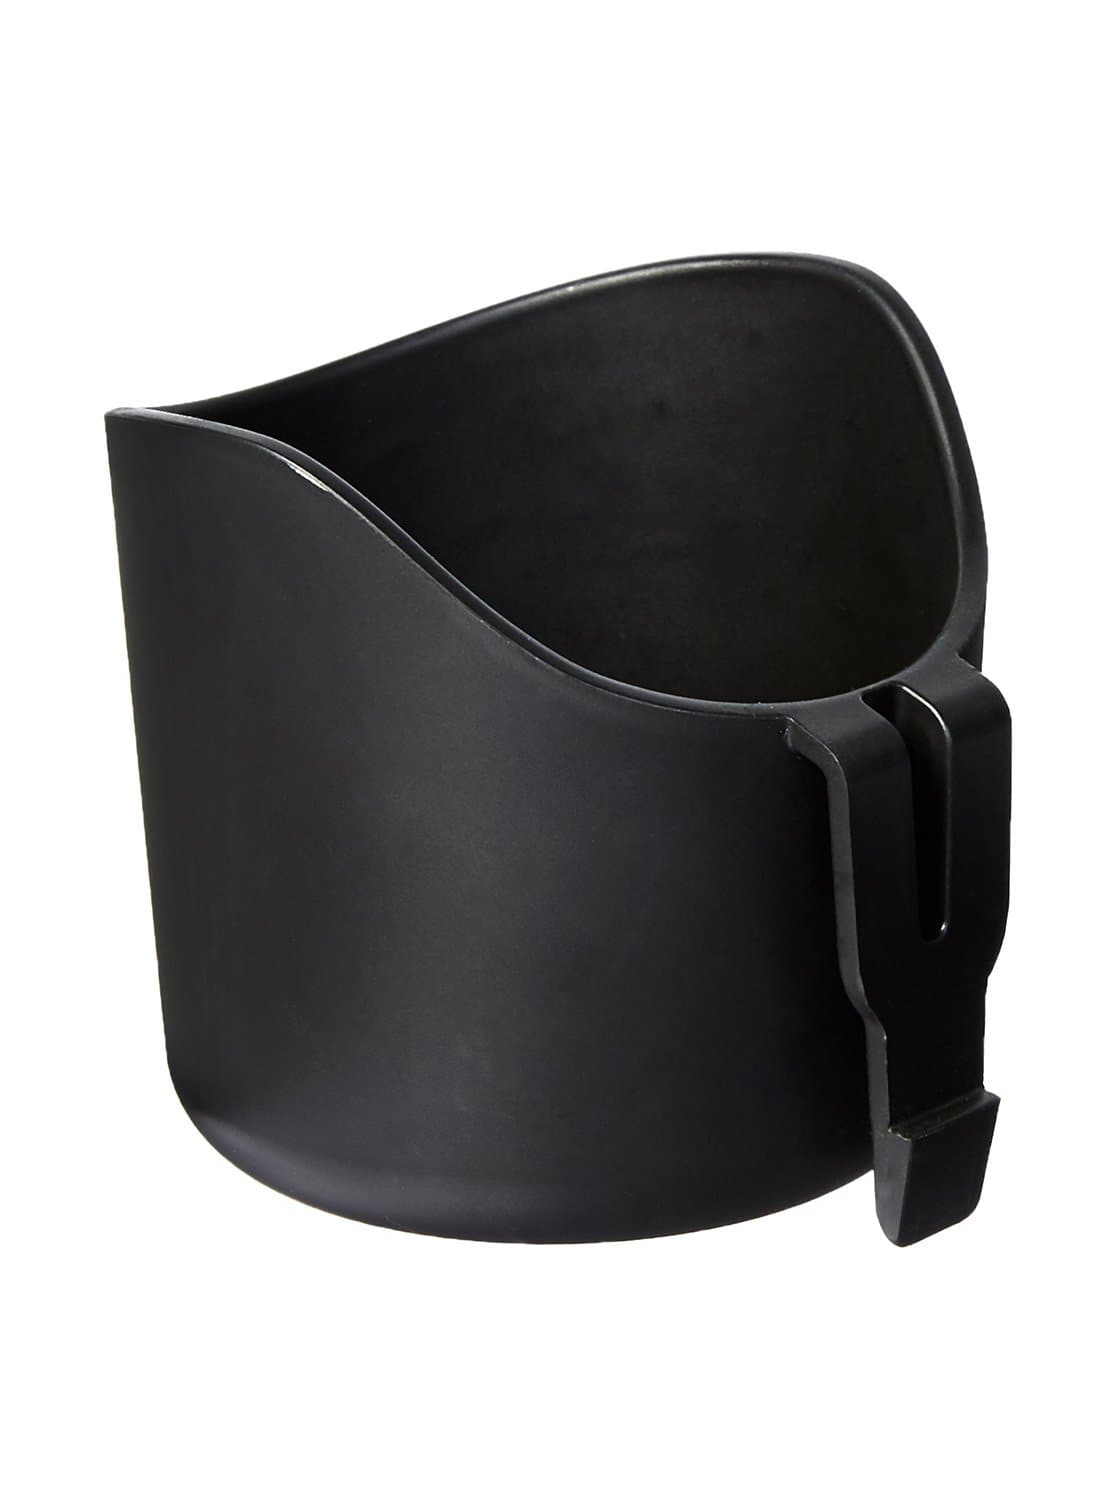 CLEK Drink-Thingy Cup Holder Fits Foonf / Fllo Car Seats - ANB Baby -$20 - $50